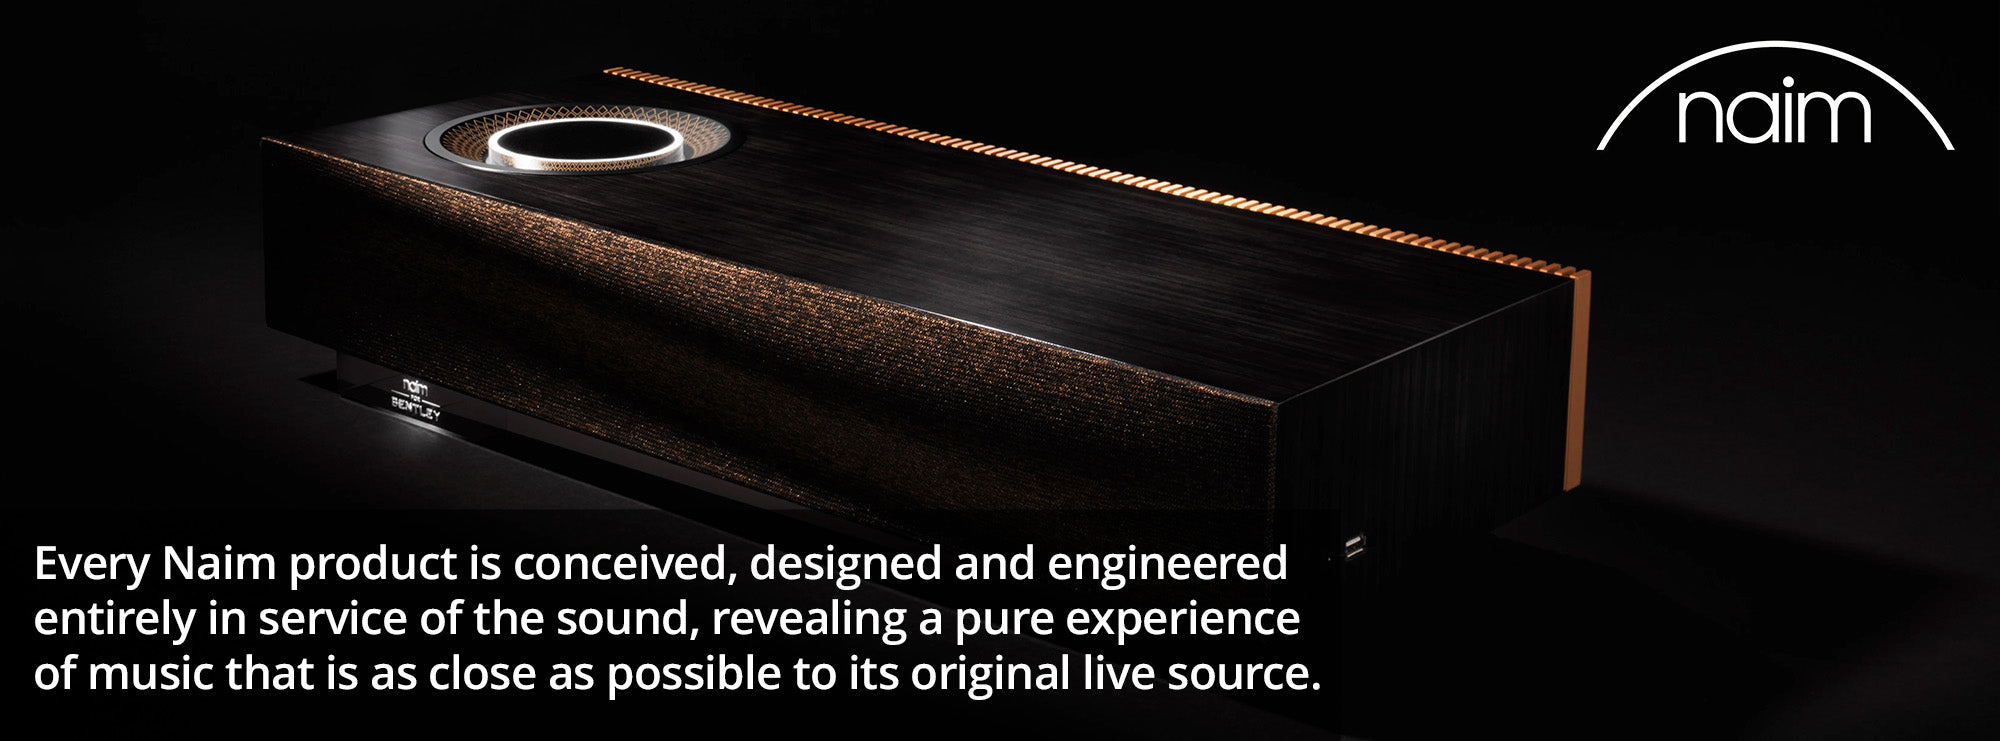 Every Naim product is conceived, designed and engineered entirely in service of the sound, revealing a pure experience of music that is as close as possible to its original live source.